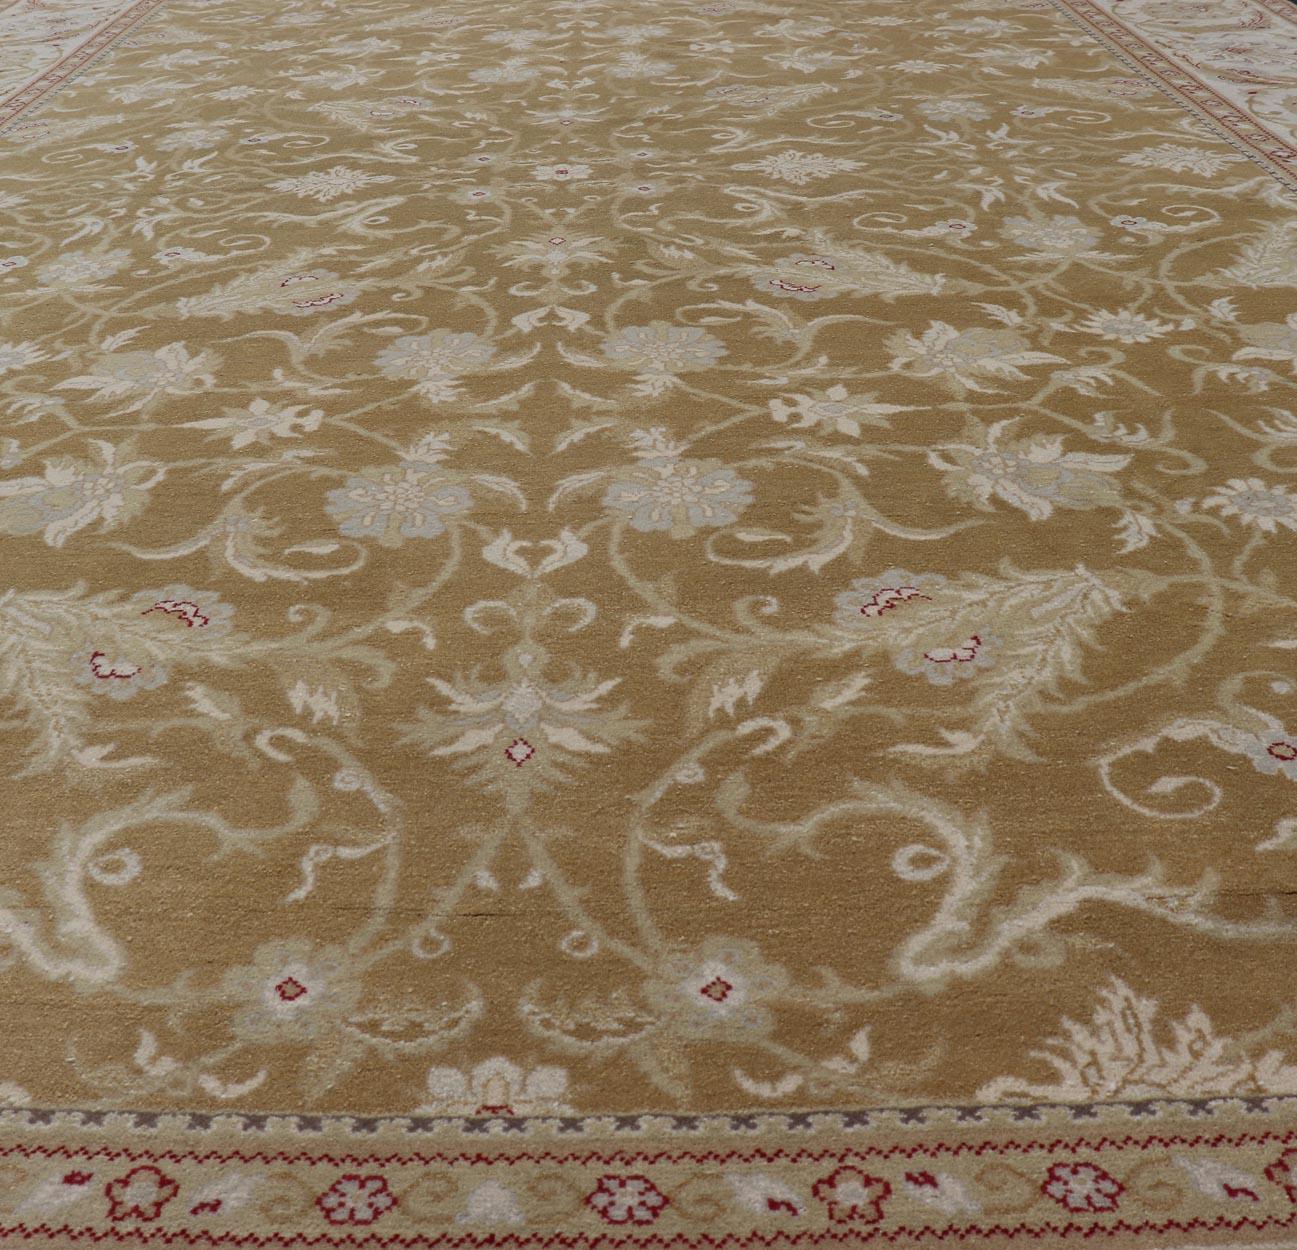 20th Century Vintage Indian Amritsar Rug with All-Over Floral Design For Sale